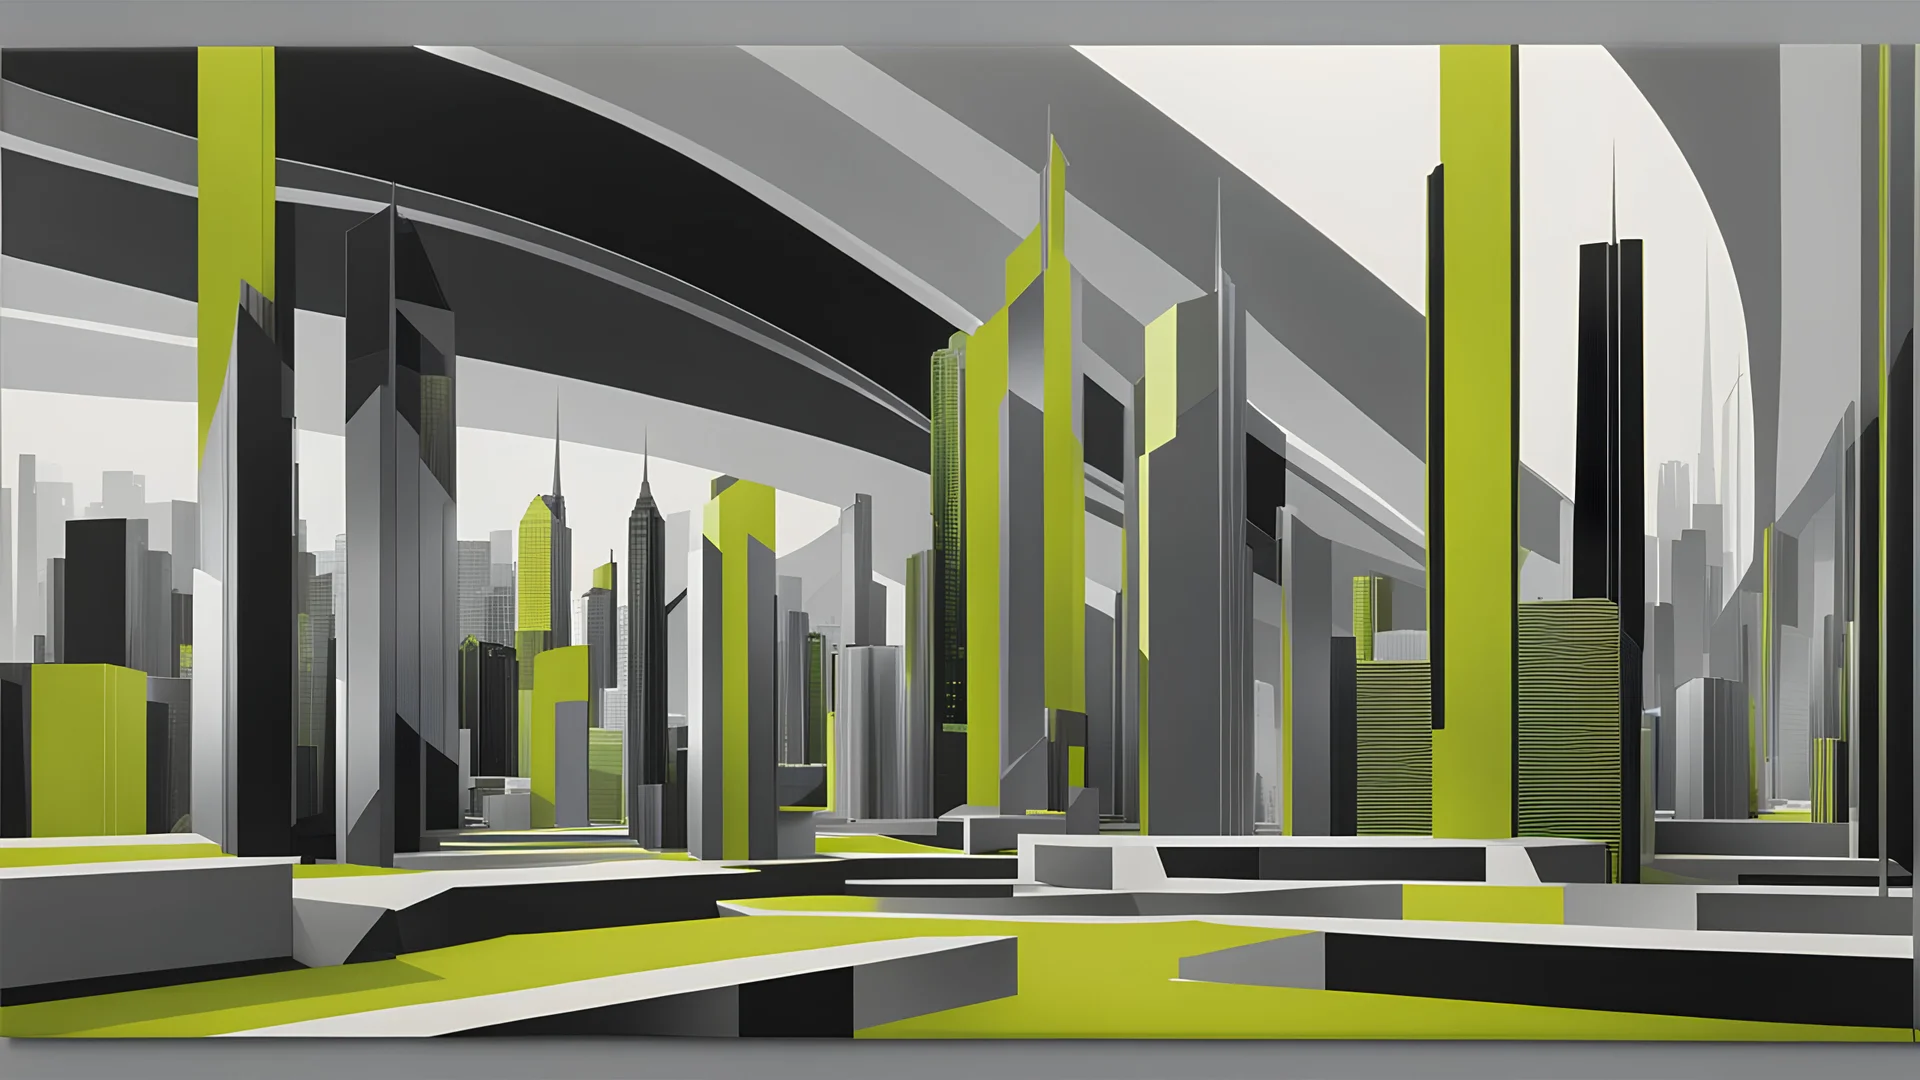 (hustle and bustle:15), loop kick, (deconstruct:28), retro futurism style, urban canyon, centered, overhead view, great verticals, great parallels, hard edge, colors of metallic chartreuse and metallic steel grey